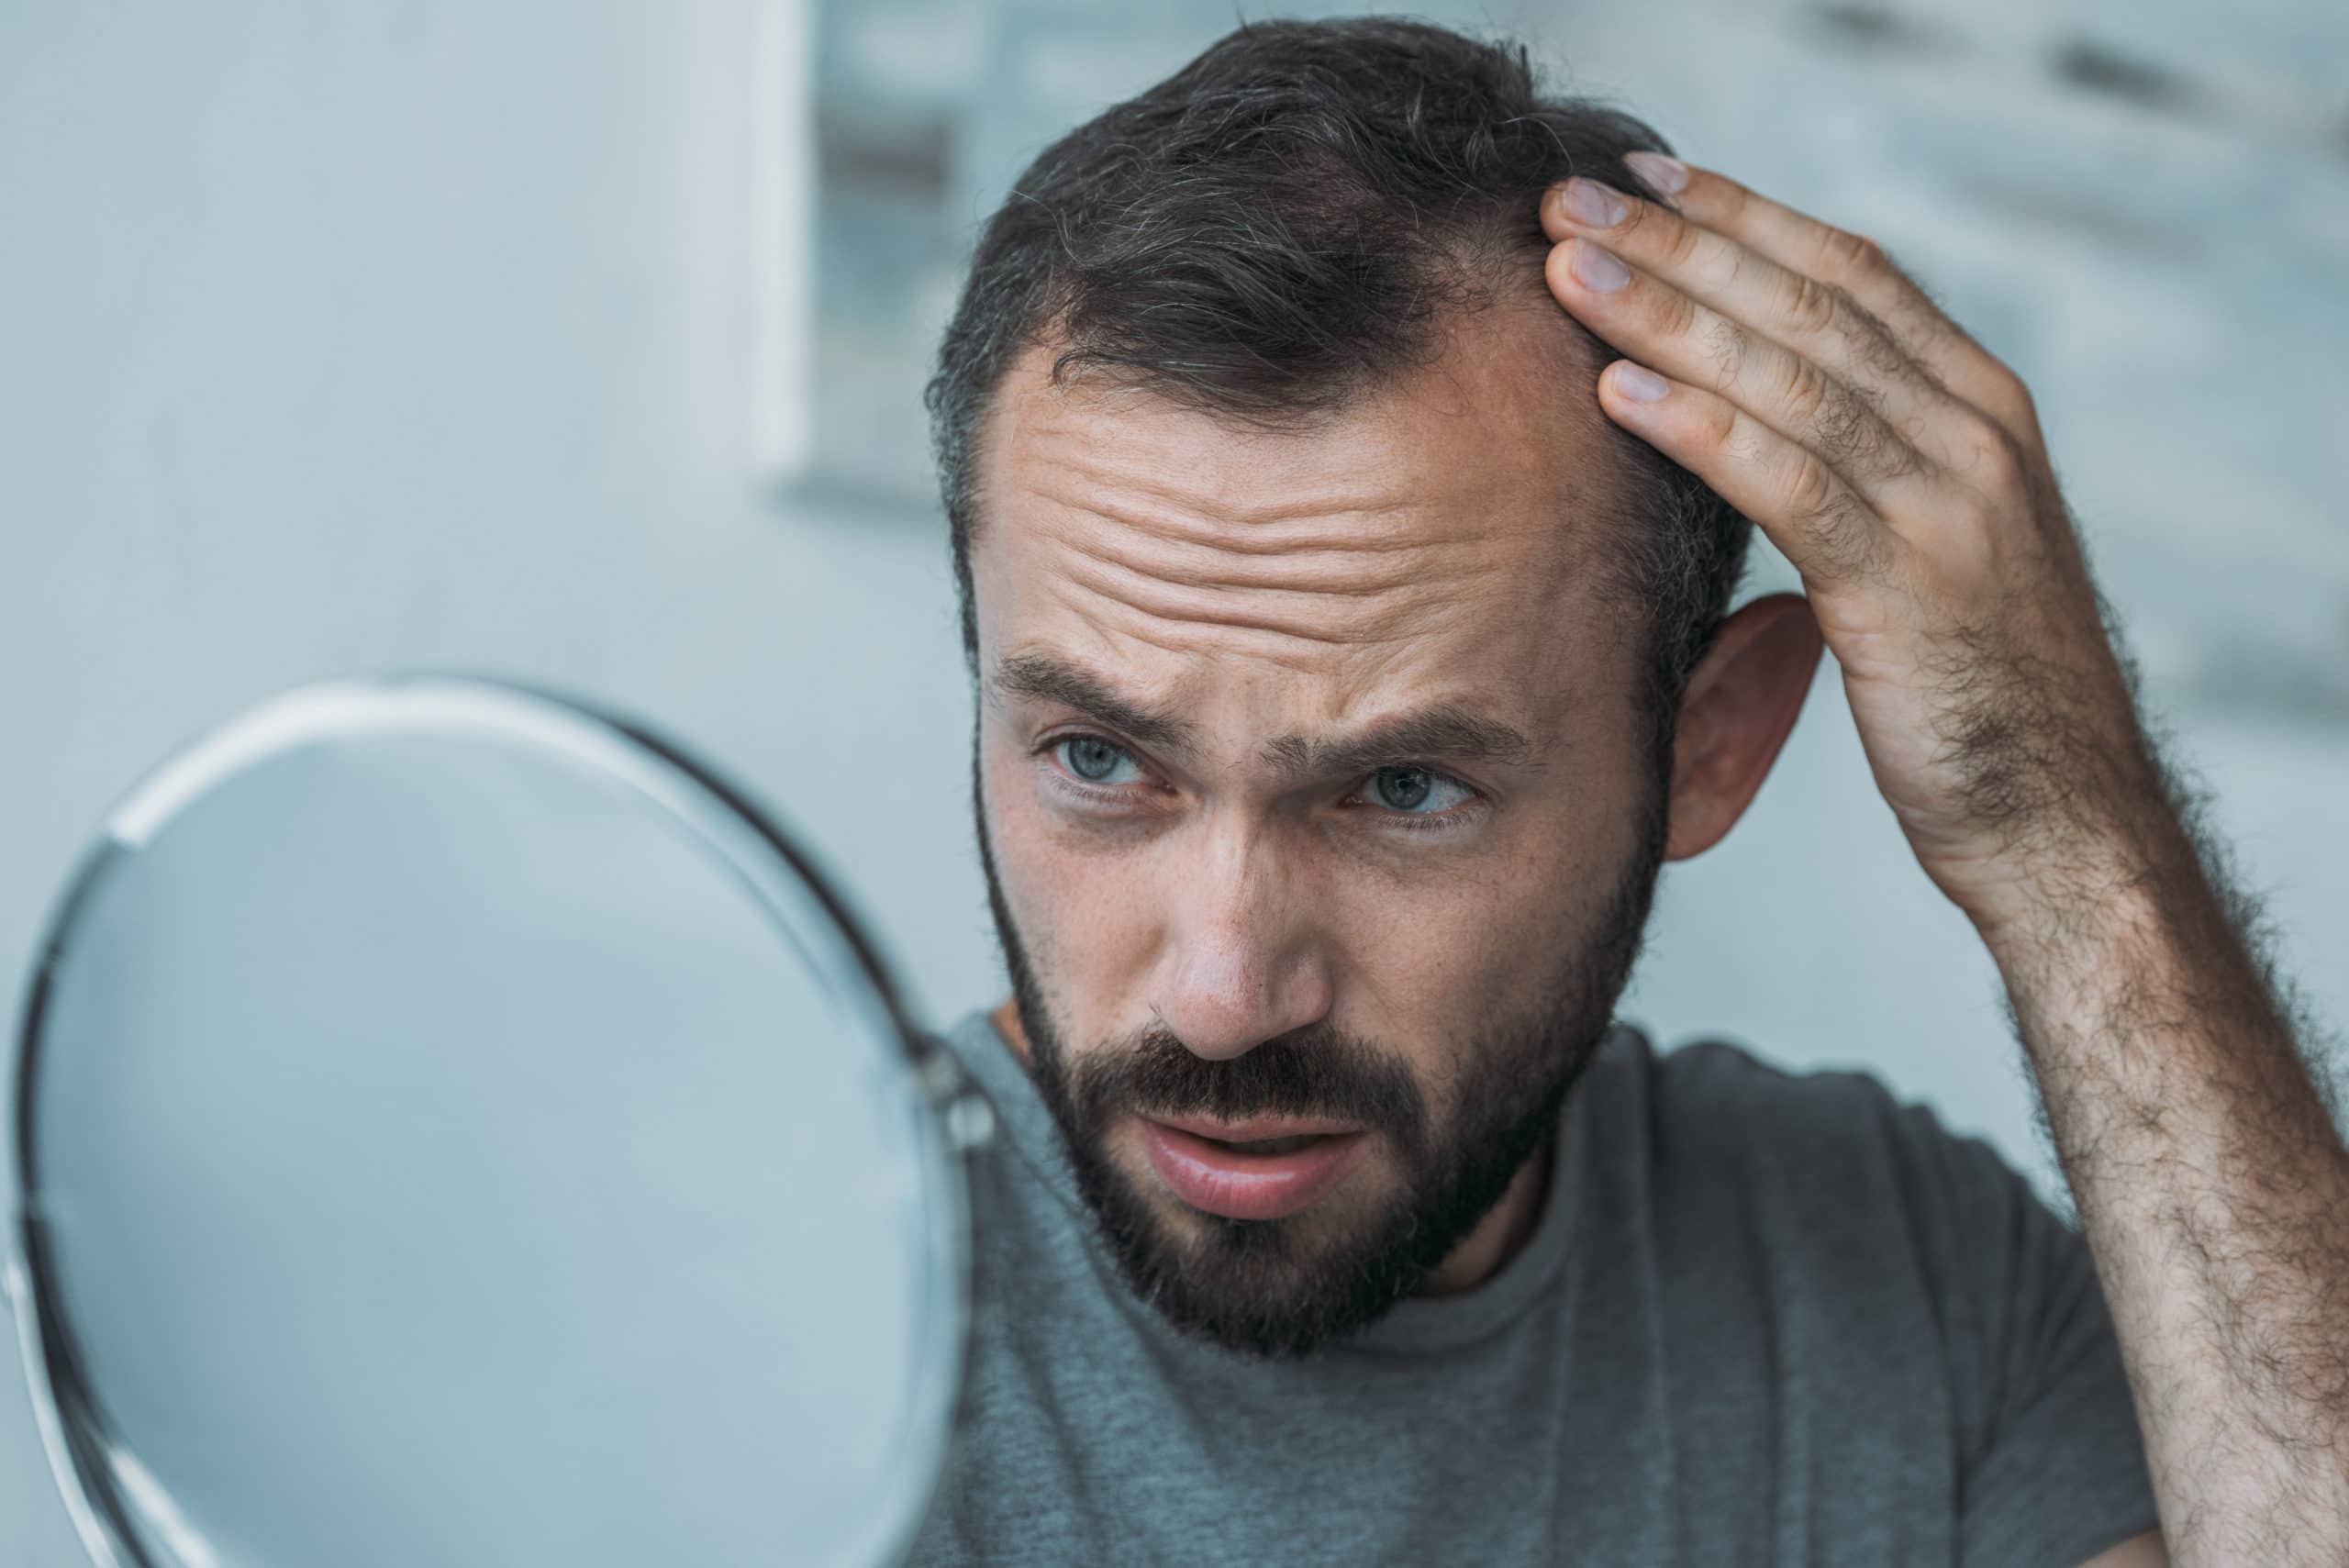 How to fix bad hair transplant